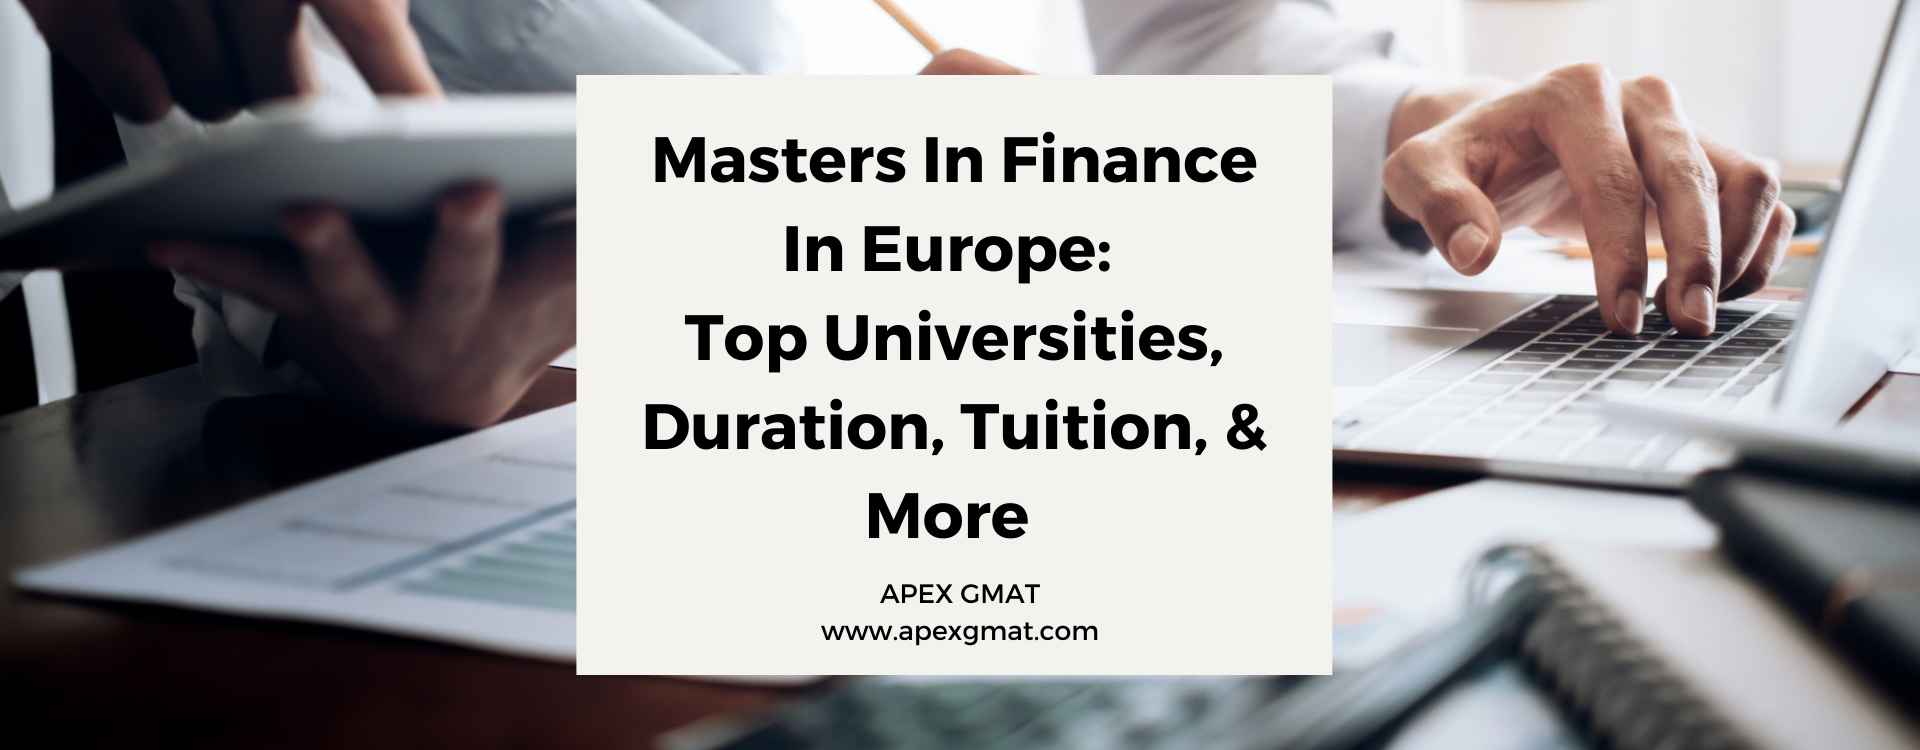 Masters In Finance In Europe: Top Universities, Duration, & More